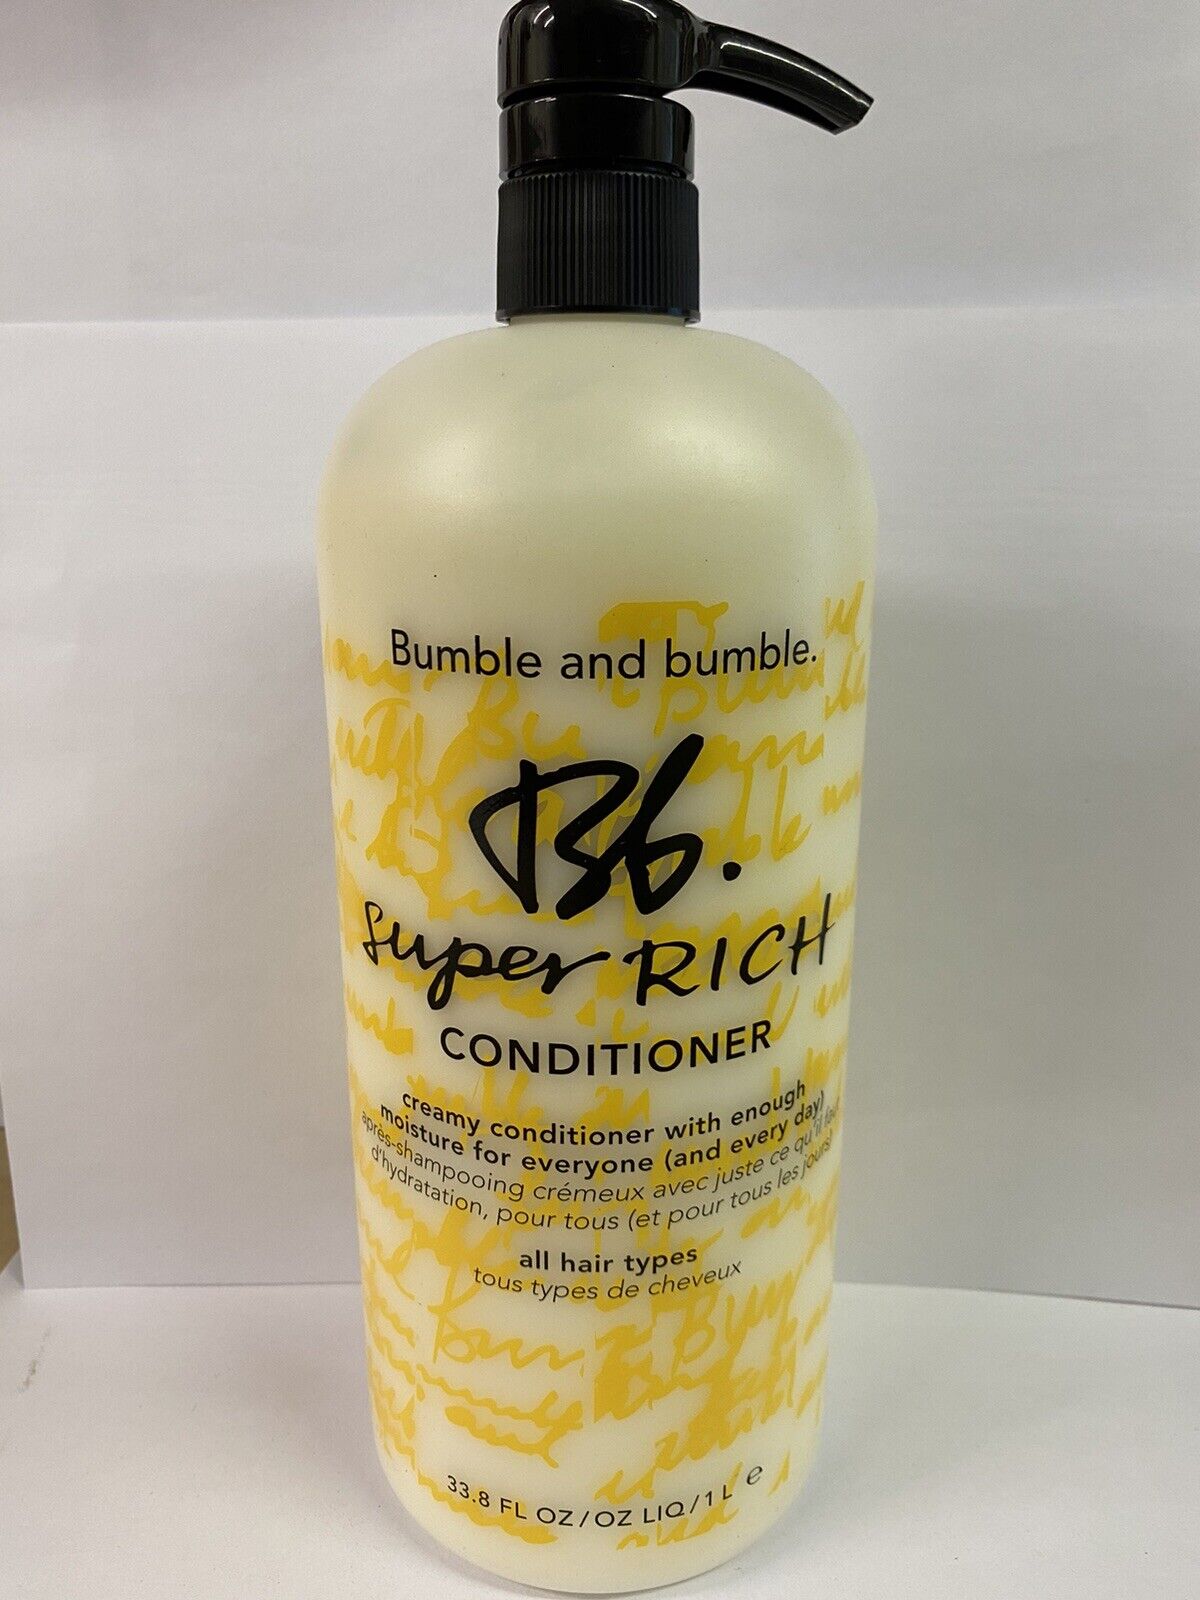 Bumble and Bumble Super Rich Conditioner 33.8oz/ 1 Liter